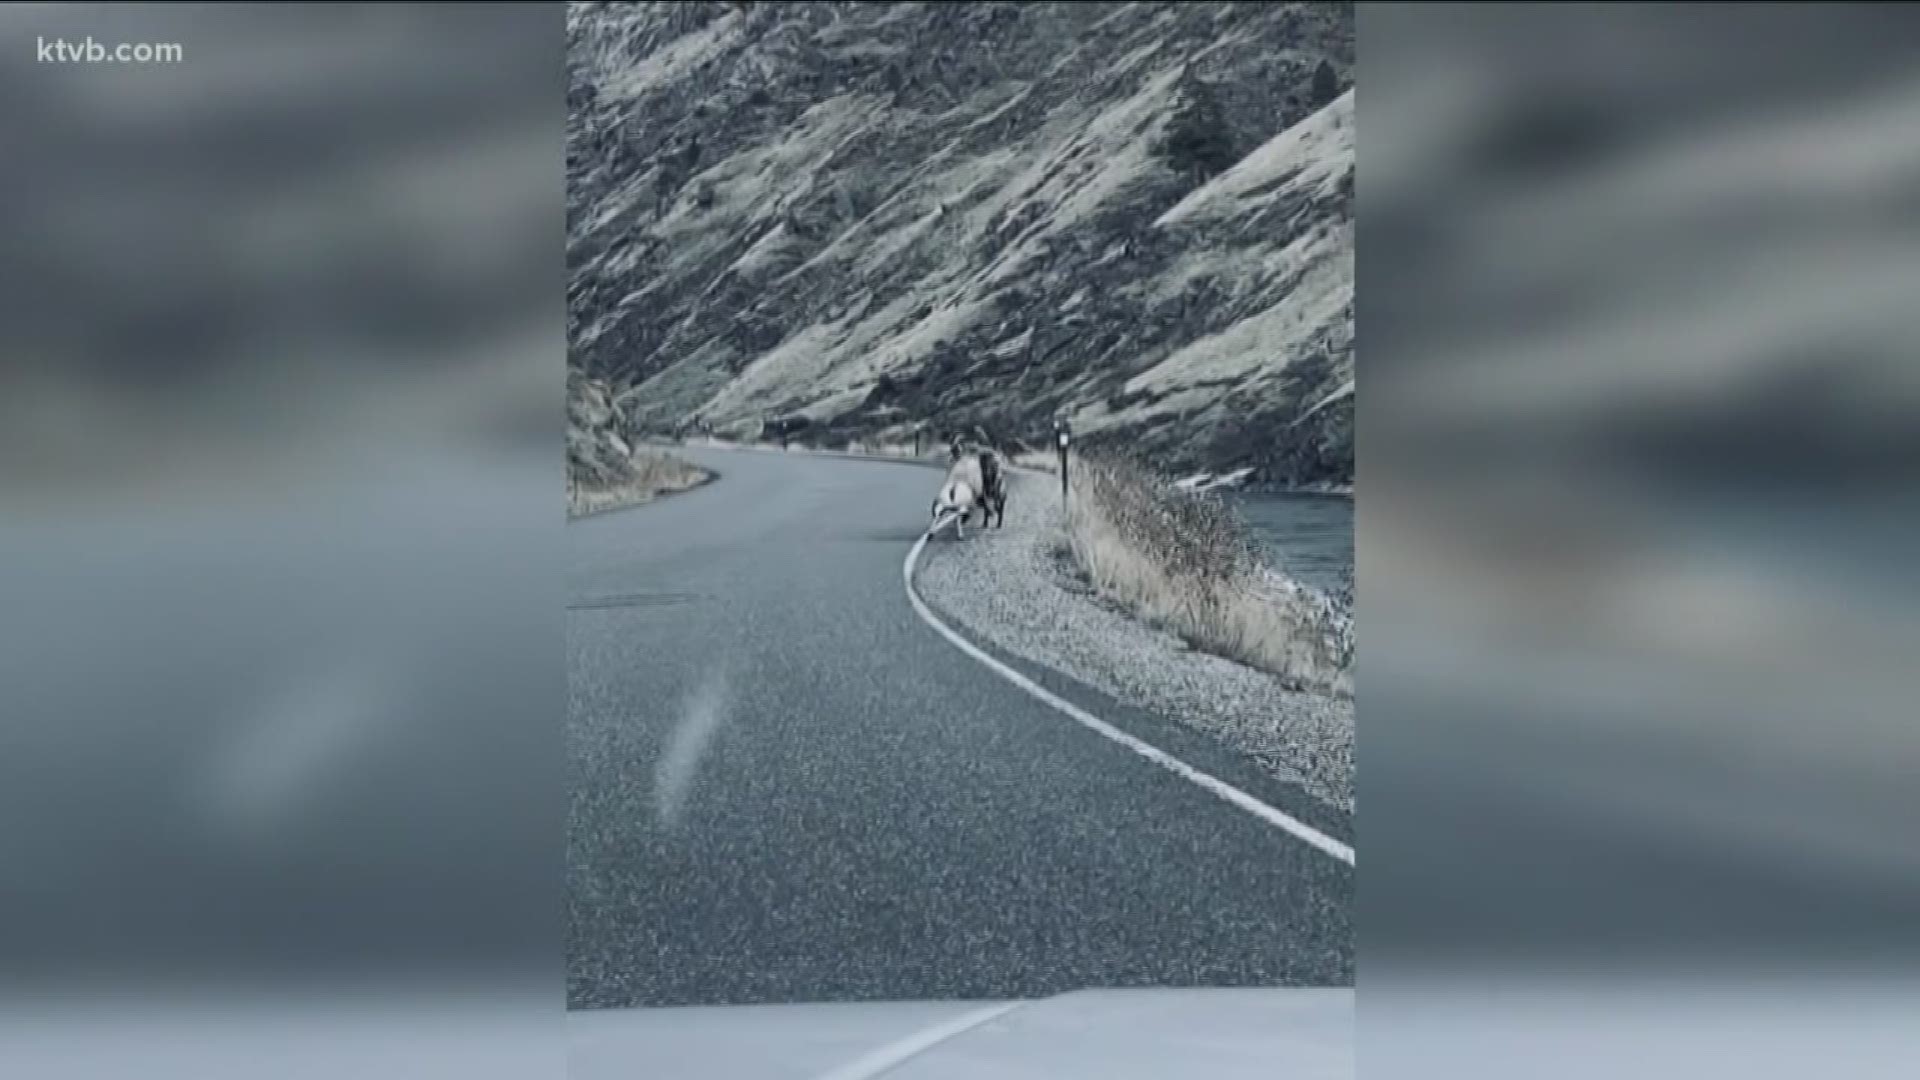 The video of the two bighorns battling was sent to us by a viewer.